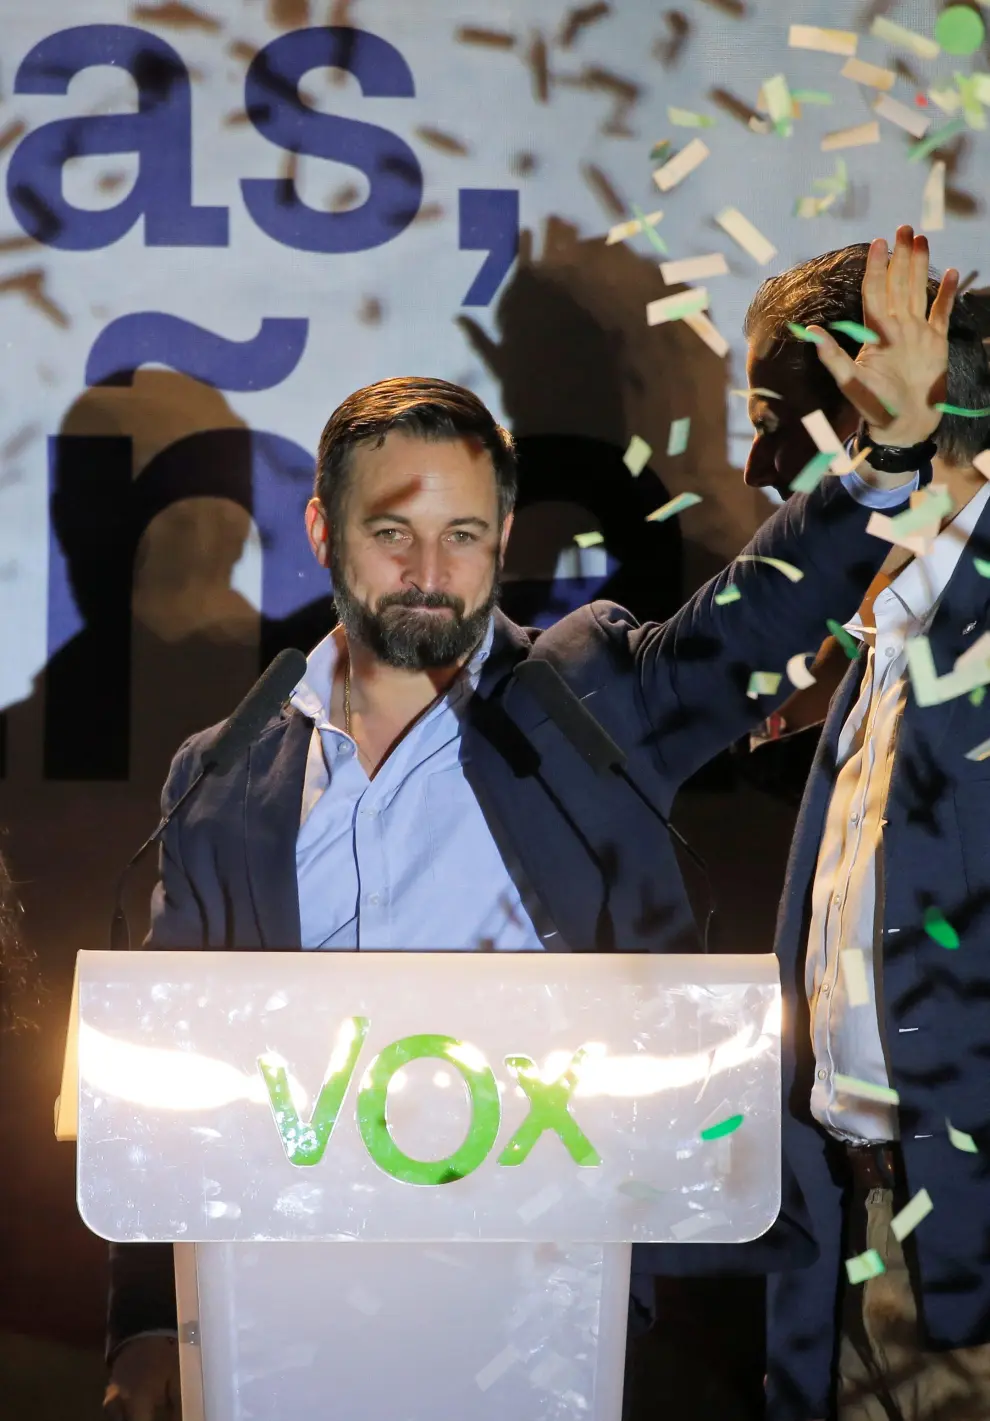 Spain's far-right party VOX candidate Santiago Abascal greets supporters after Spain's general election results were announced, in Madrid, Spain, April 28, 2019. REUTERS/Jon Nazca [[[REUTERS VOCENTO]]] SPAIN-ELECTION/ABASCAL REAX